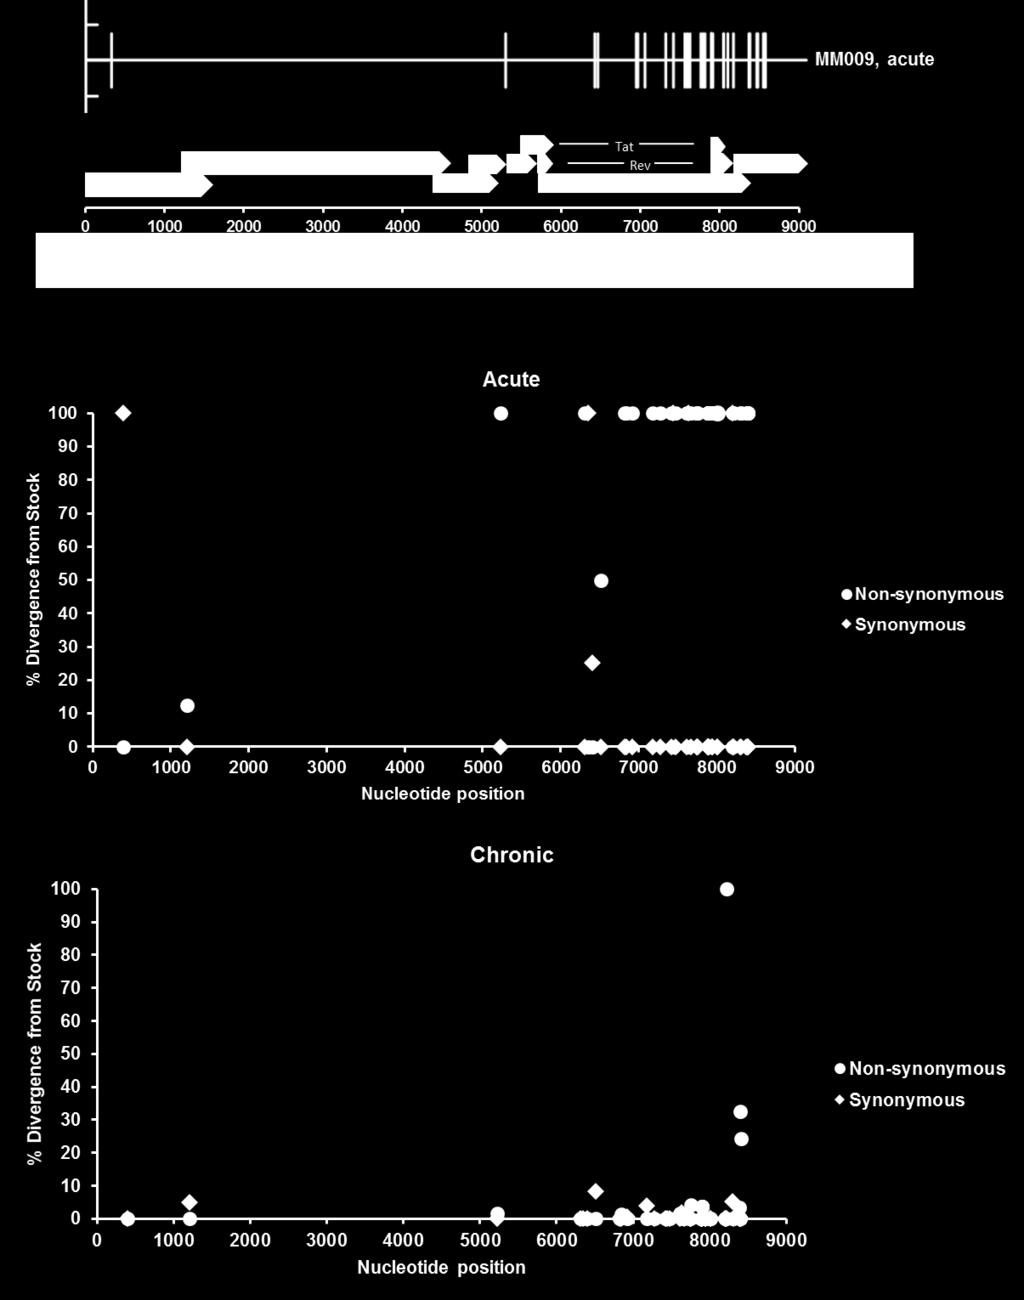 Figure 7. APOBEC3 hypermutation. Top panel: Hypermut output for SIVsmE543-infected animal MM009, acute time point.